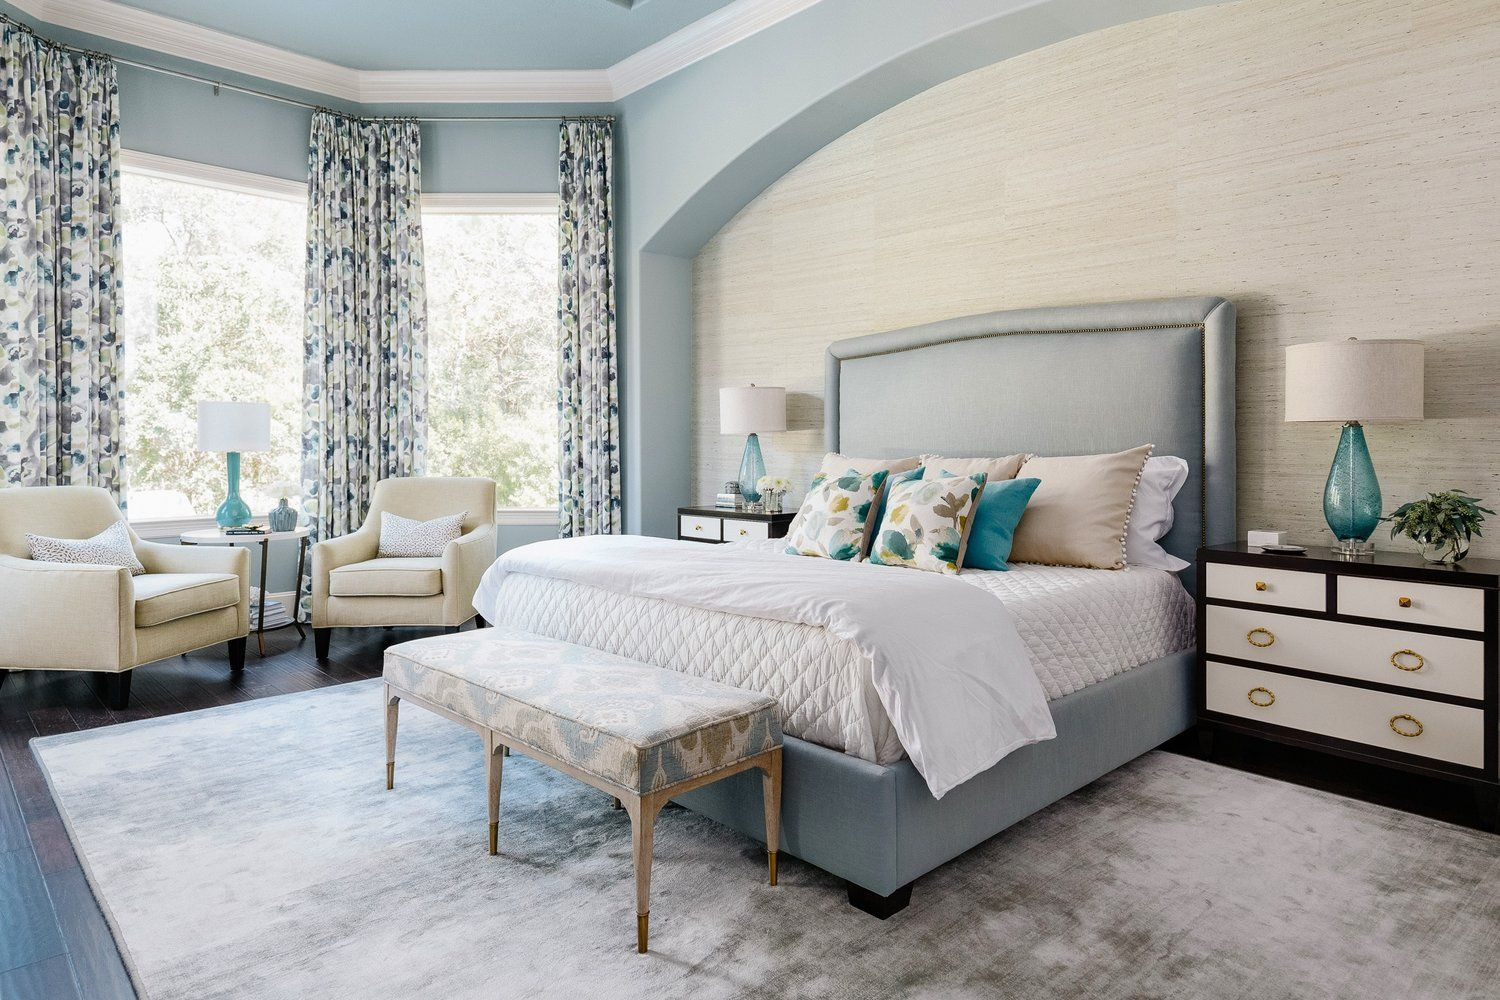 Master Bedroom Pics
 PROJECT REVEAL A Luxurious Master Bedroom Retreat